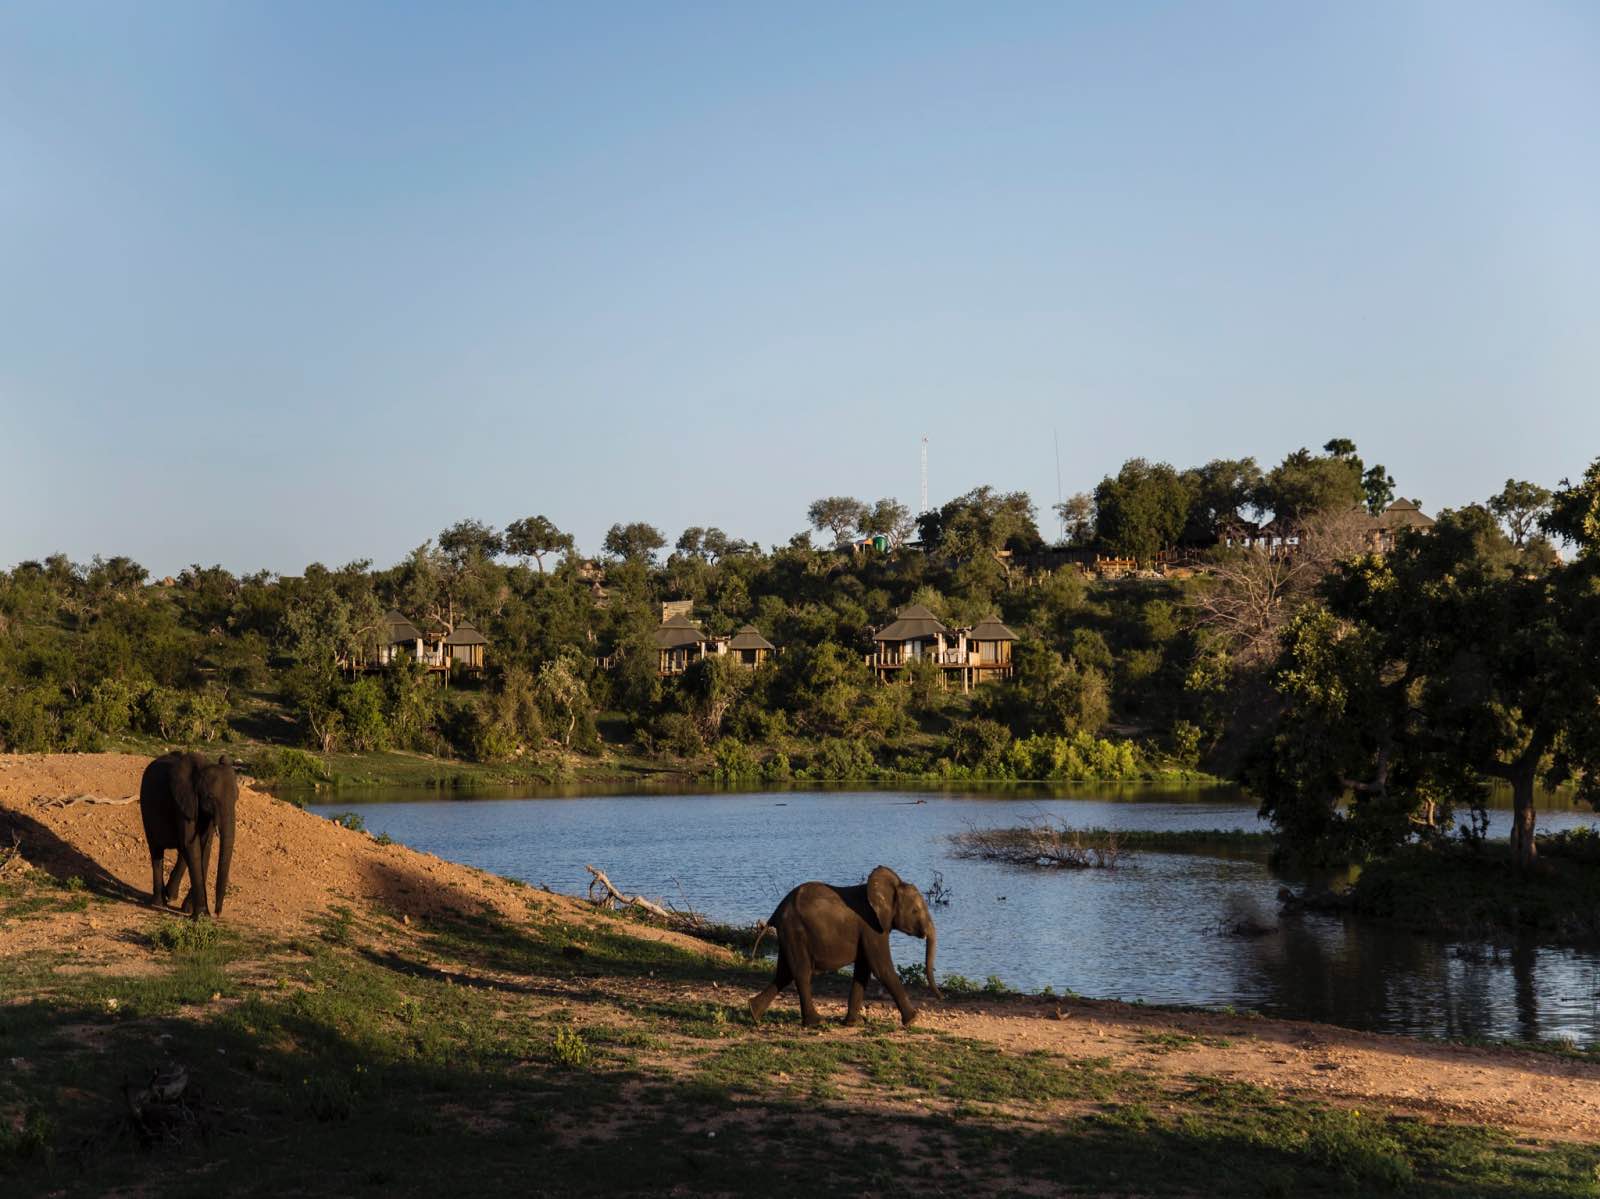 Simbavati Hilltop Lodge positioned between the trees on the raised koppie overlooking the water and elephants